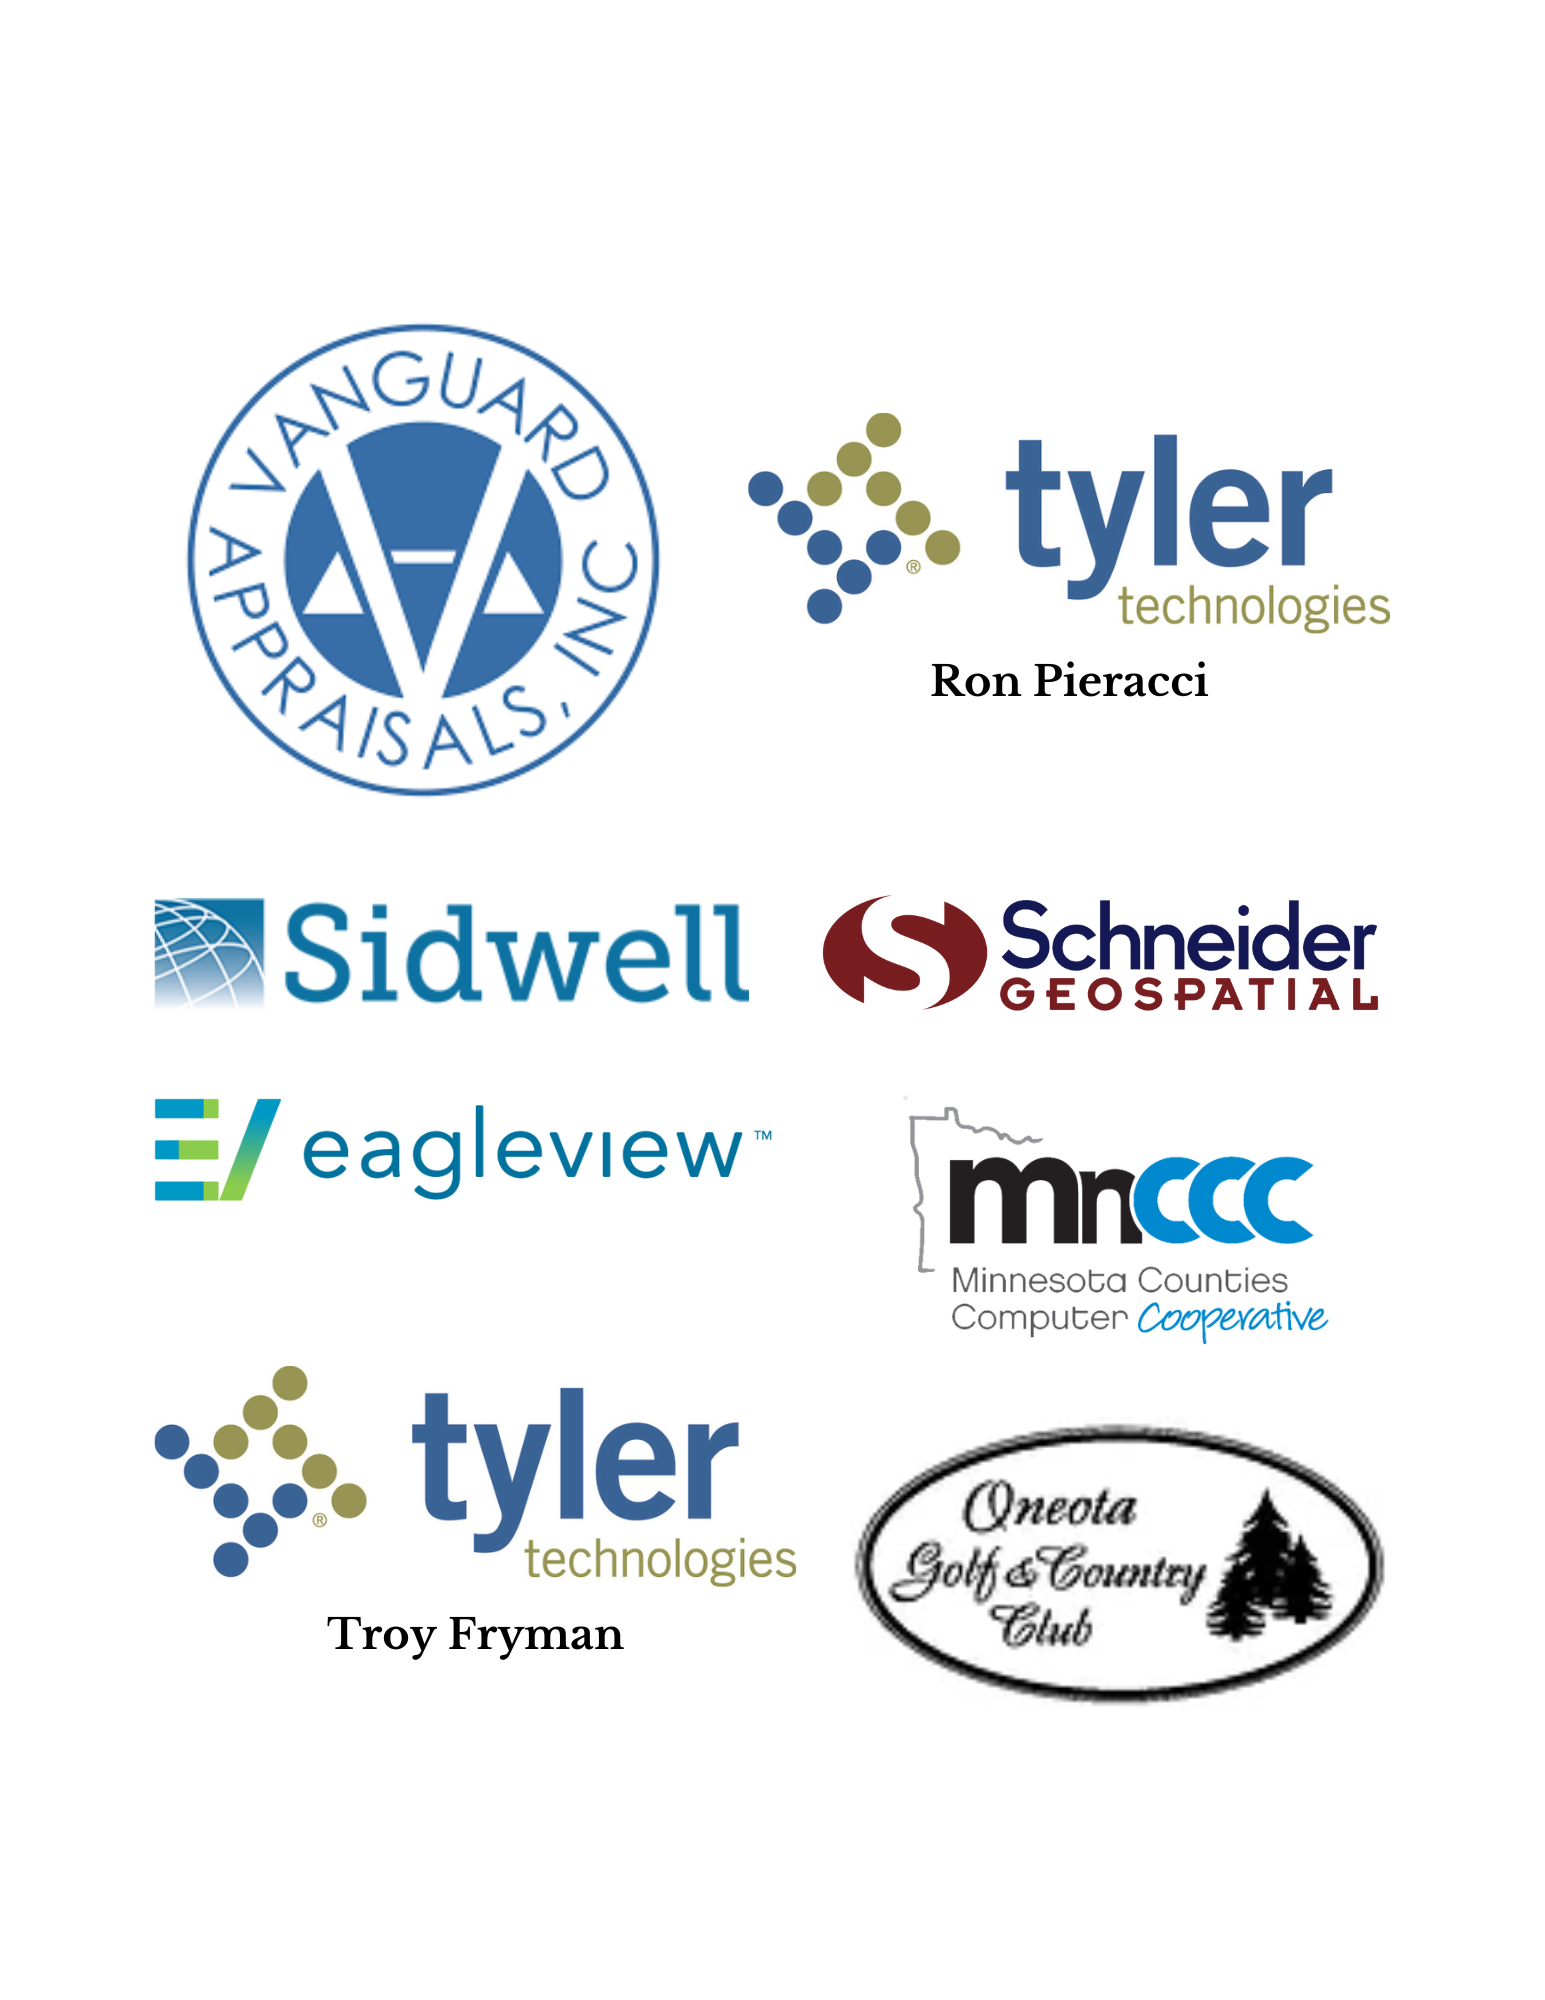 Logos and company names for sponsors